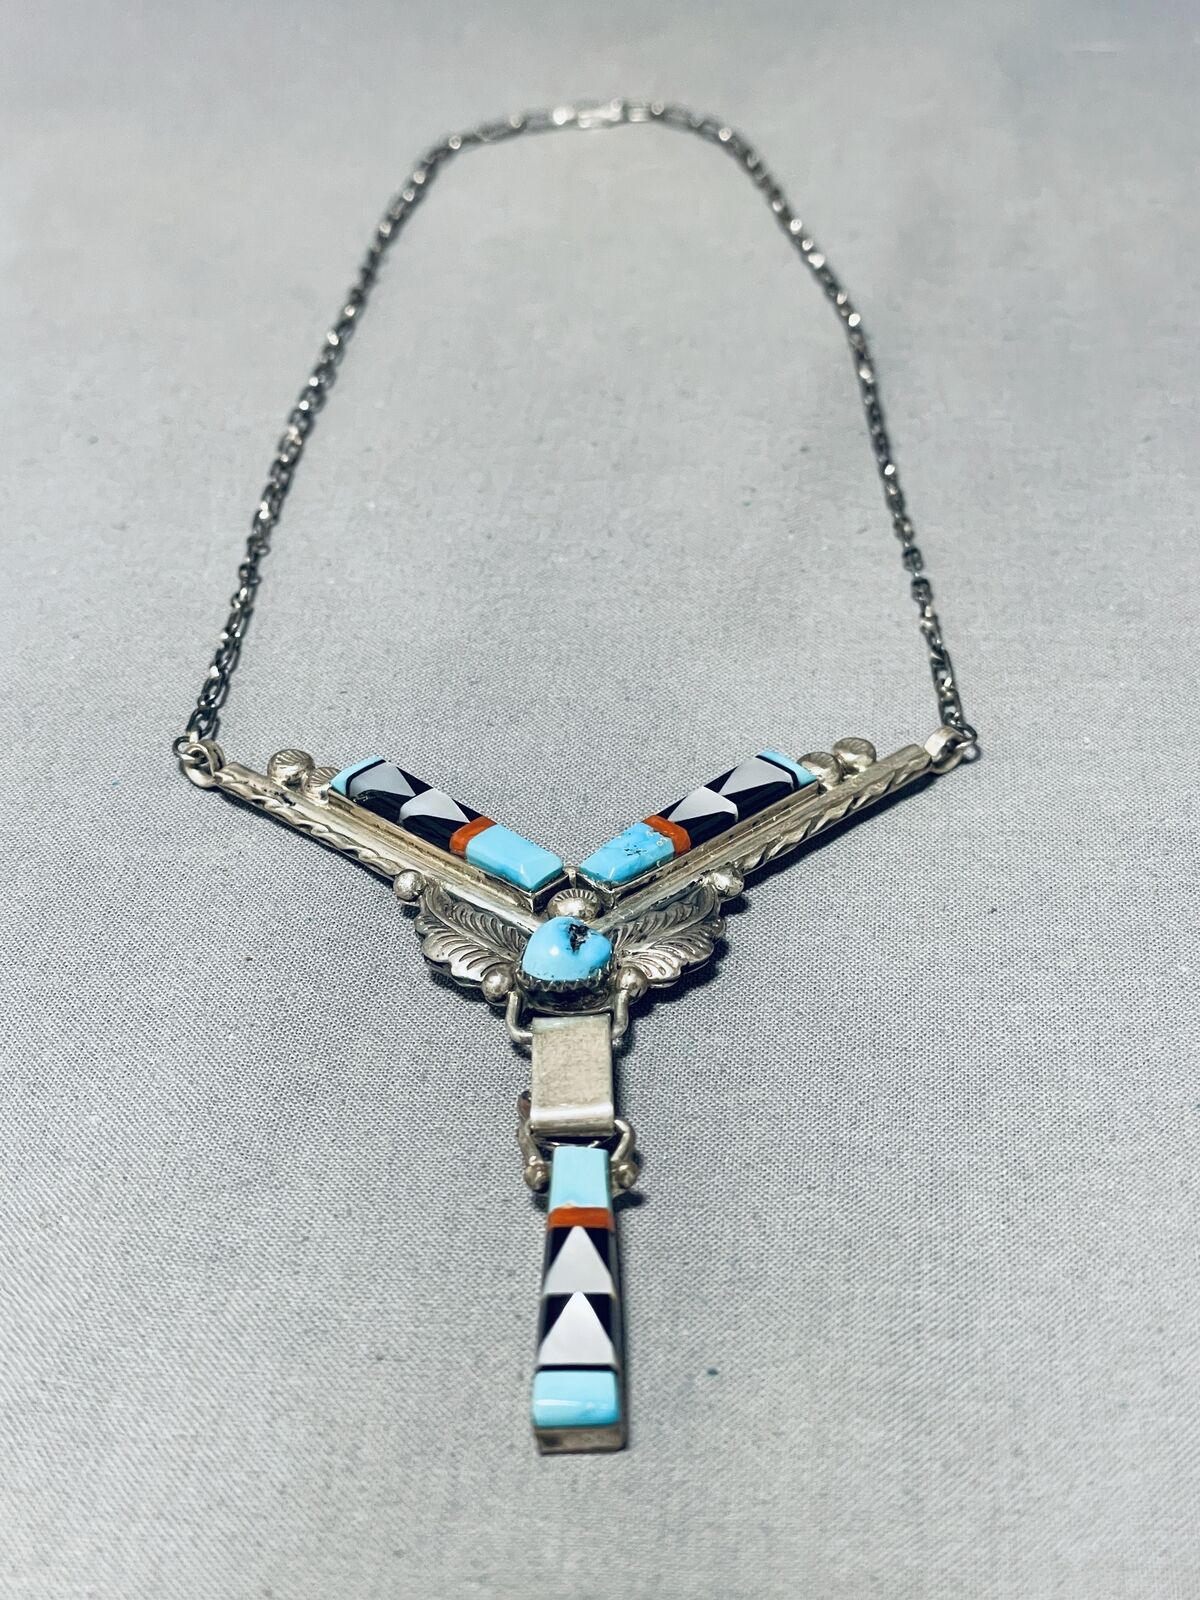 DROPDEAD GORGEOUS BIB VINTAGE ZUNI TURQUOISE INLAY STERLING SILVER NECKLACE